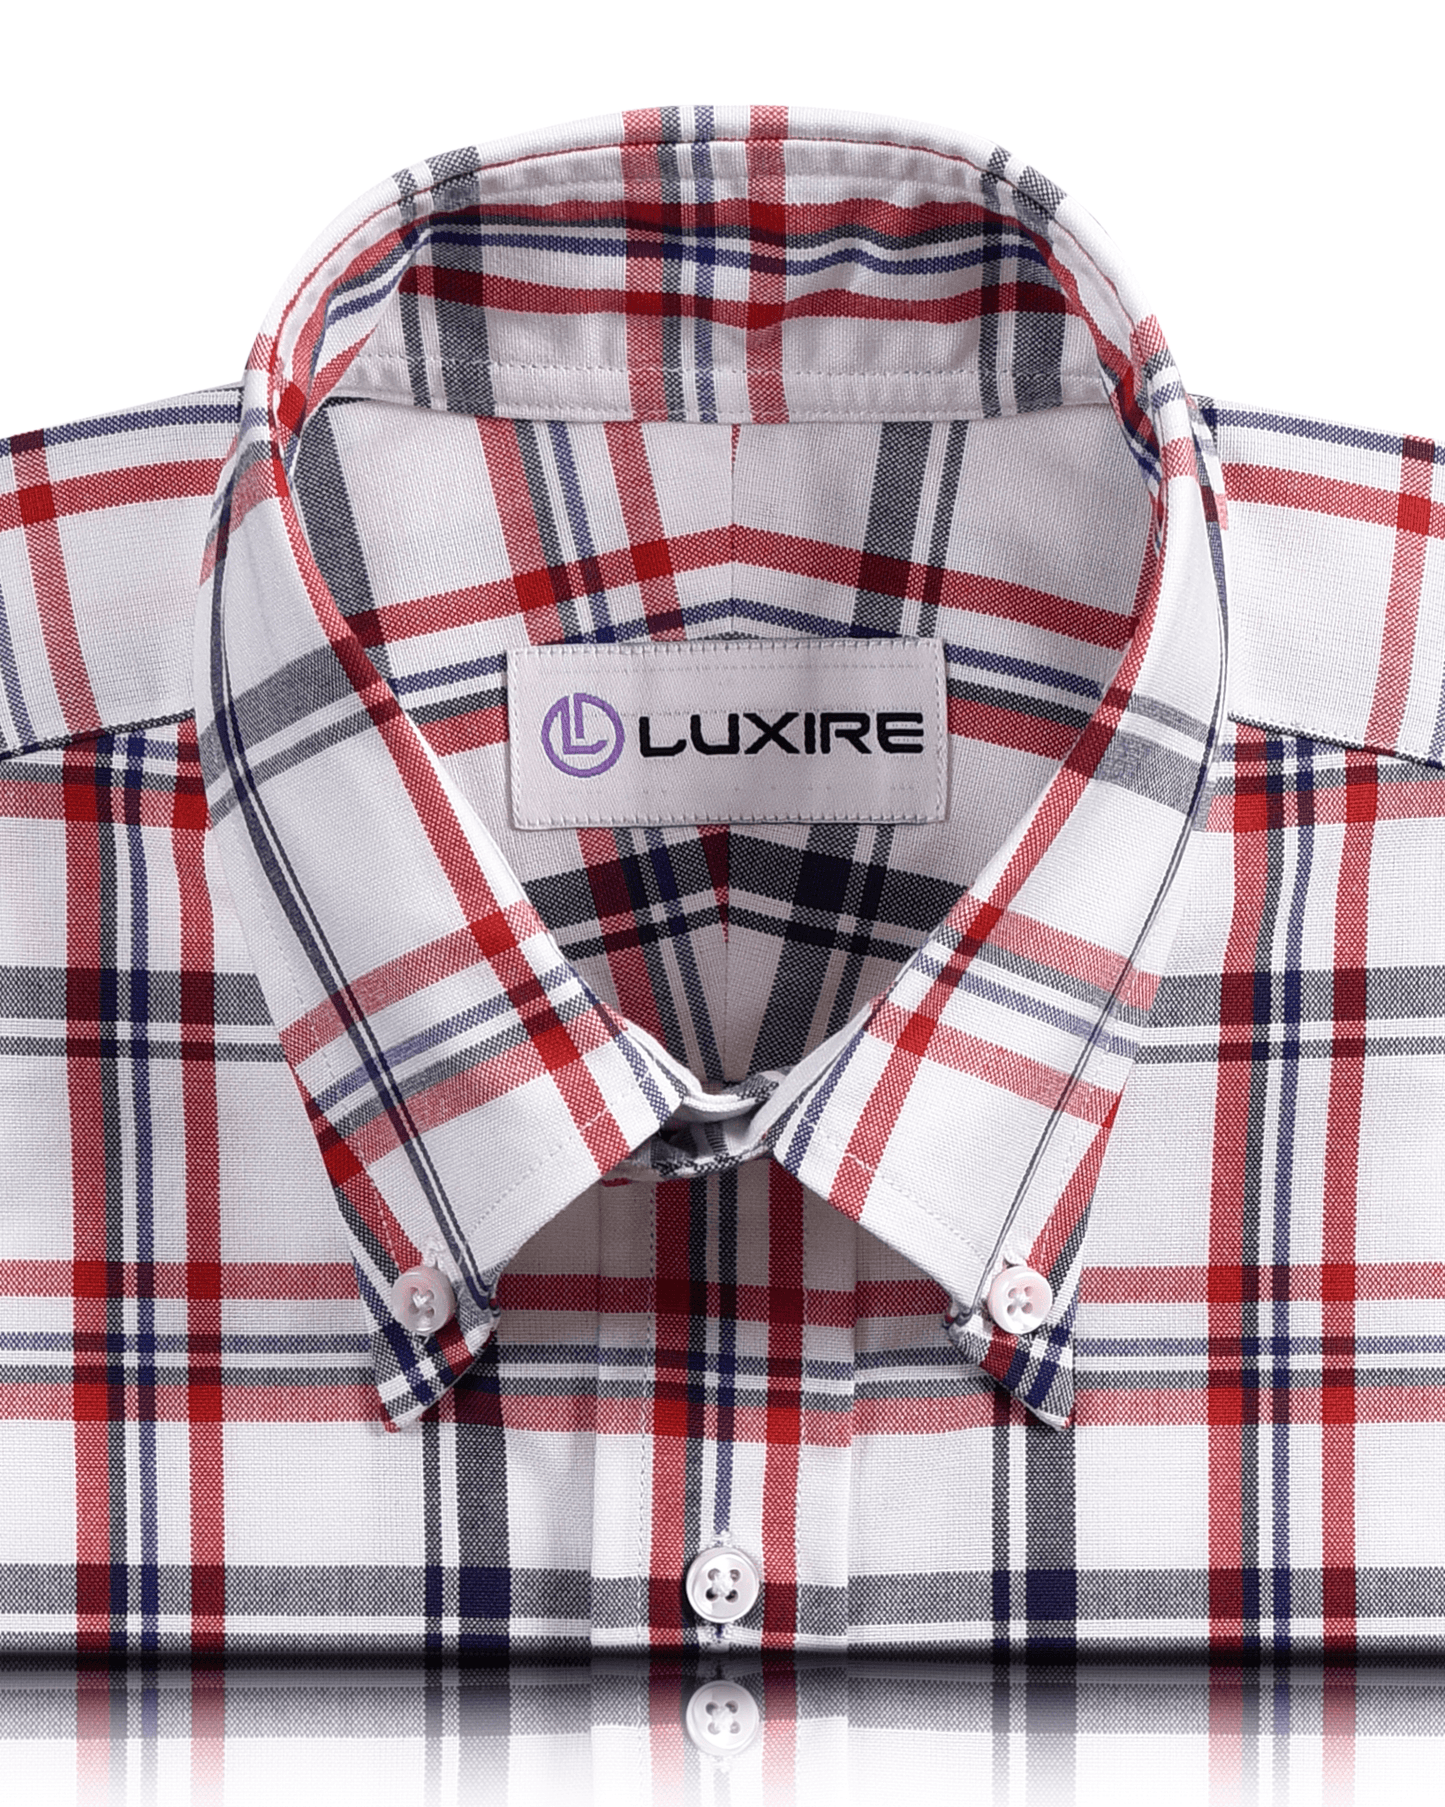 Front close view of custom check shirts for men by Luxire red and navy oxford